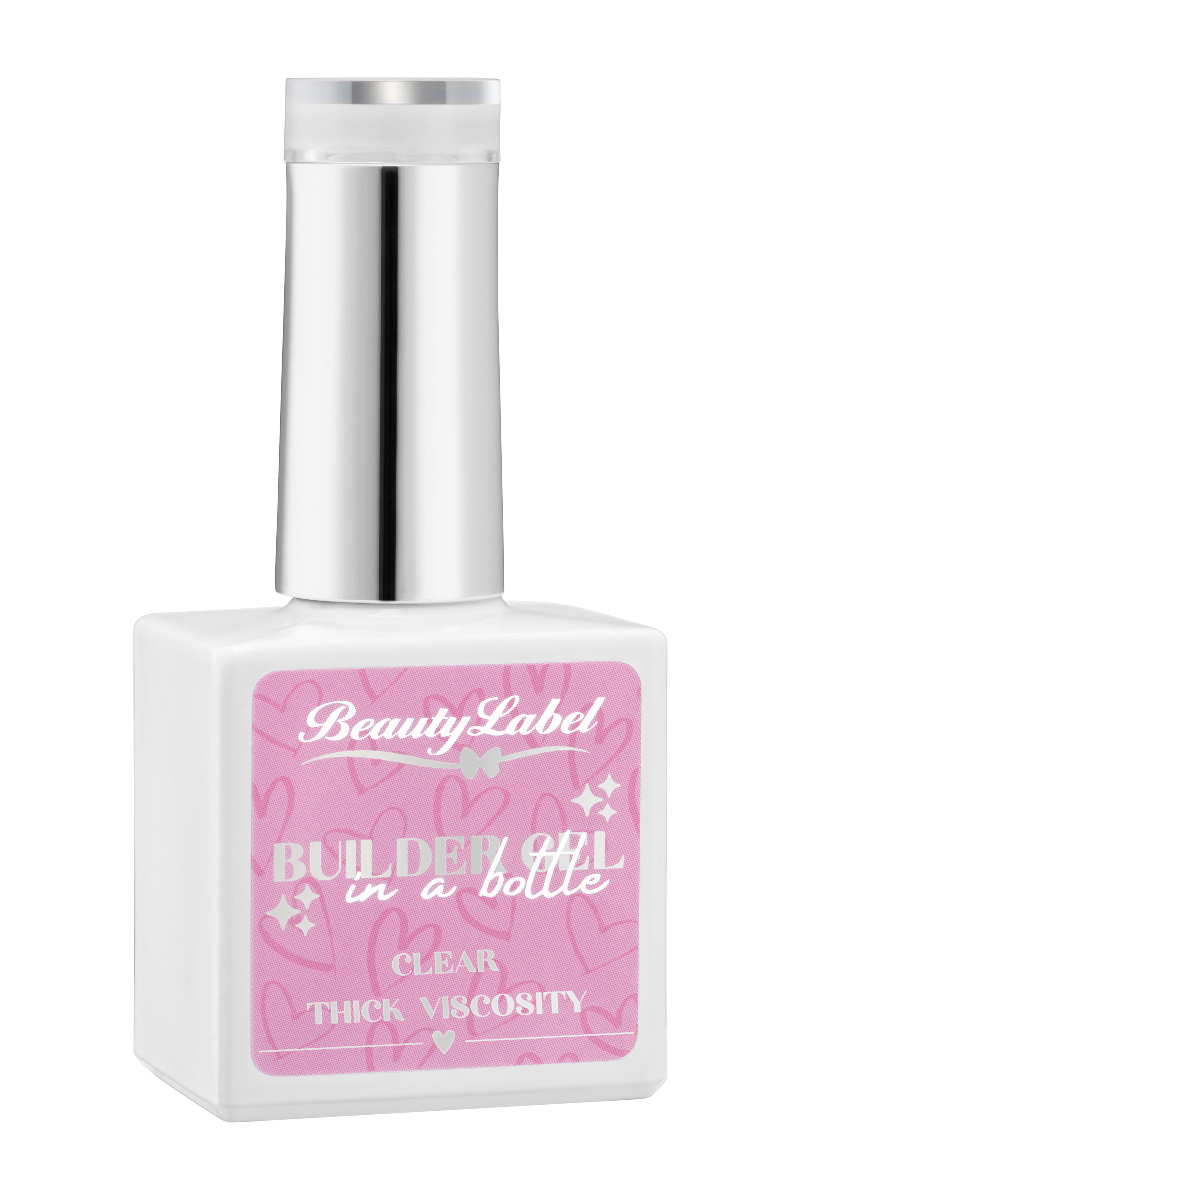 Beauty Label Builder in a bottle Clear thick viscosity